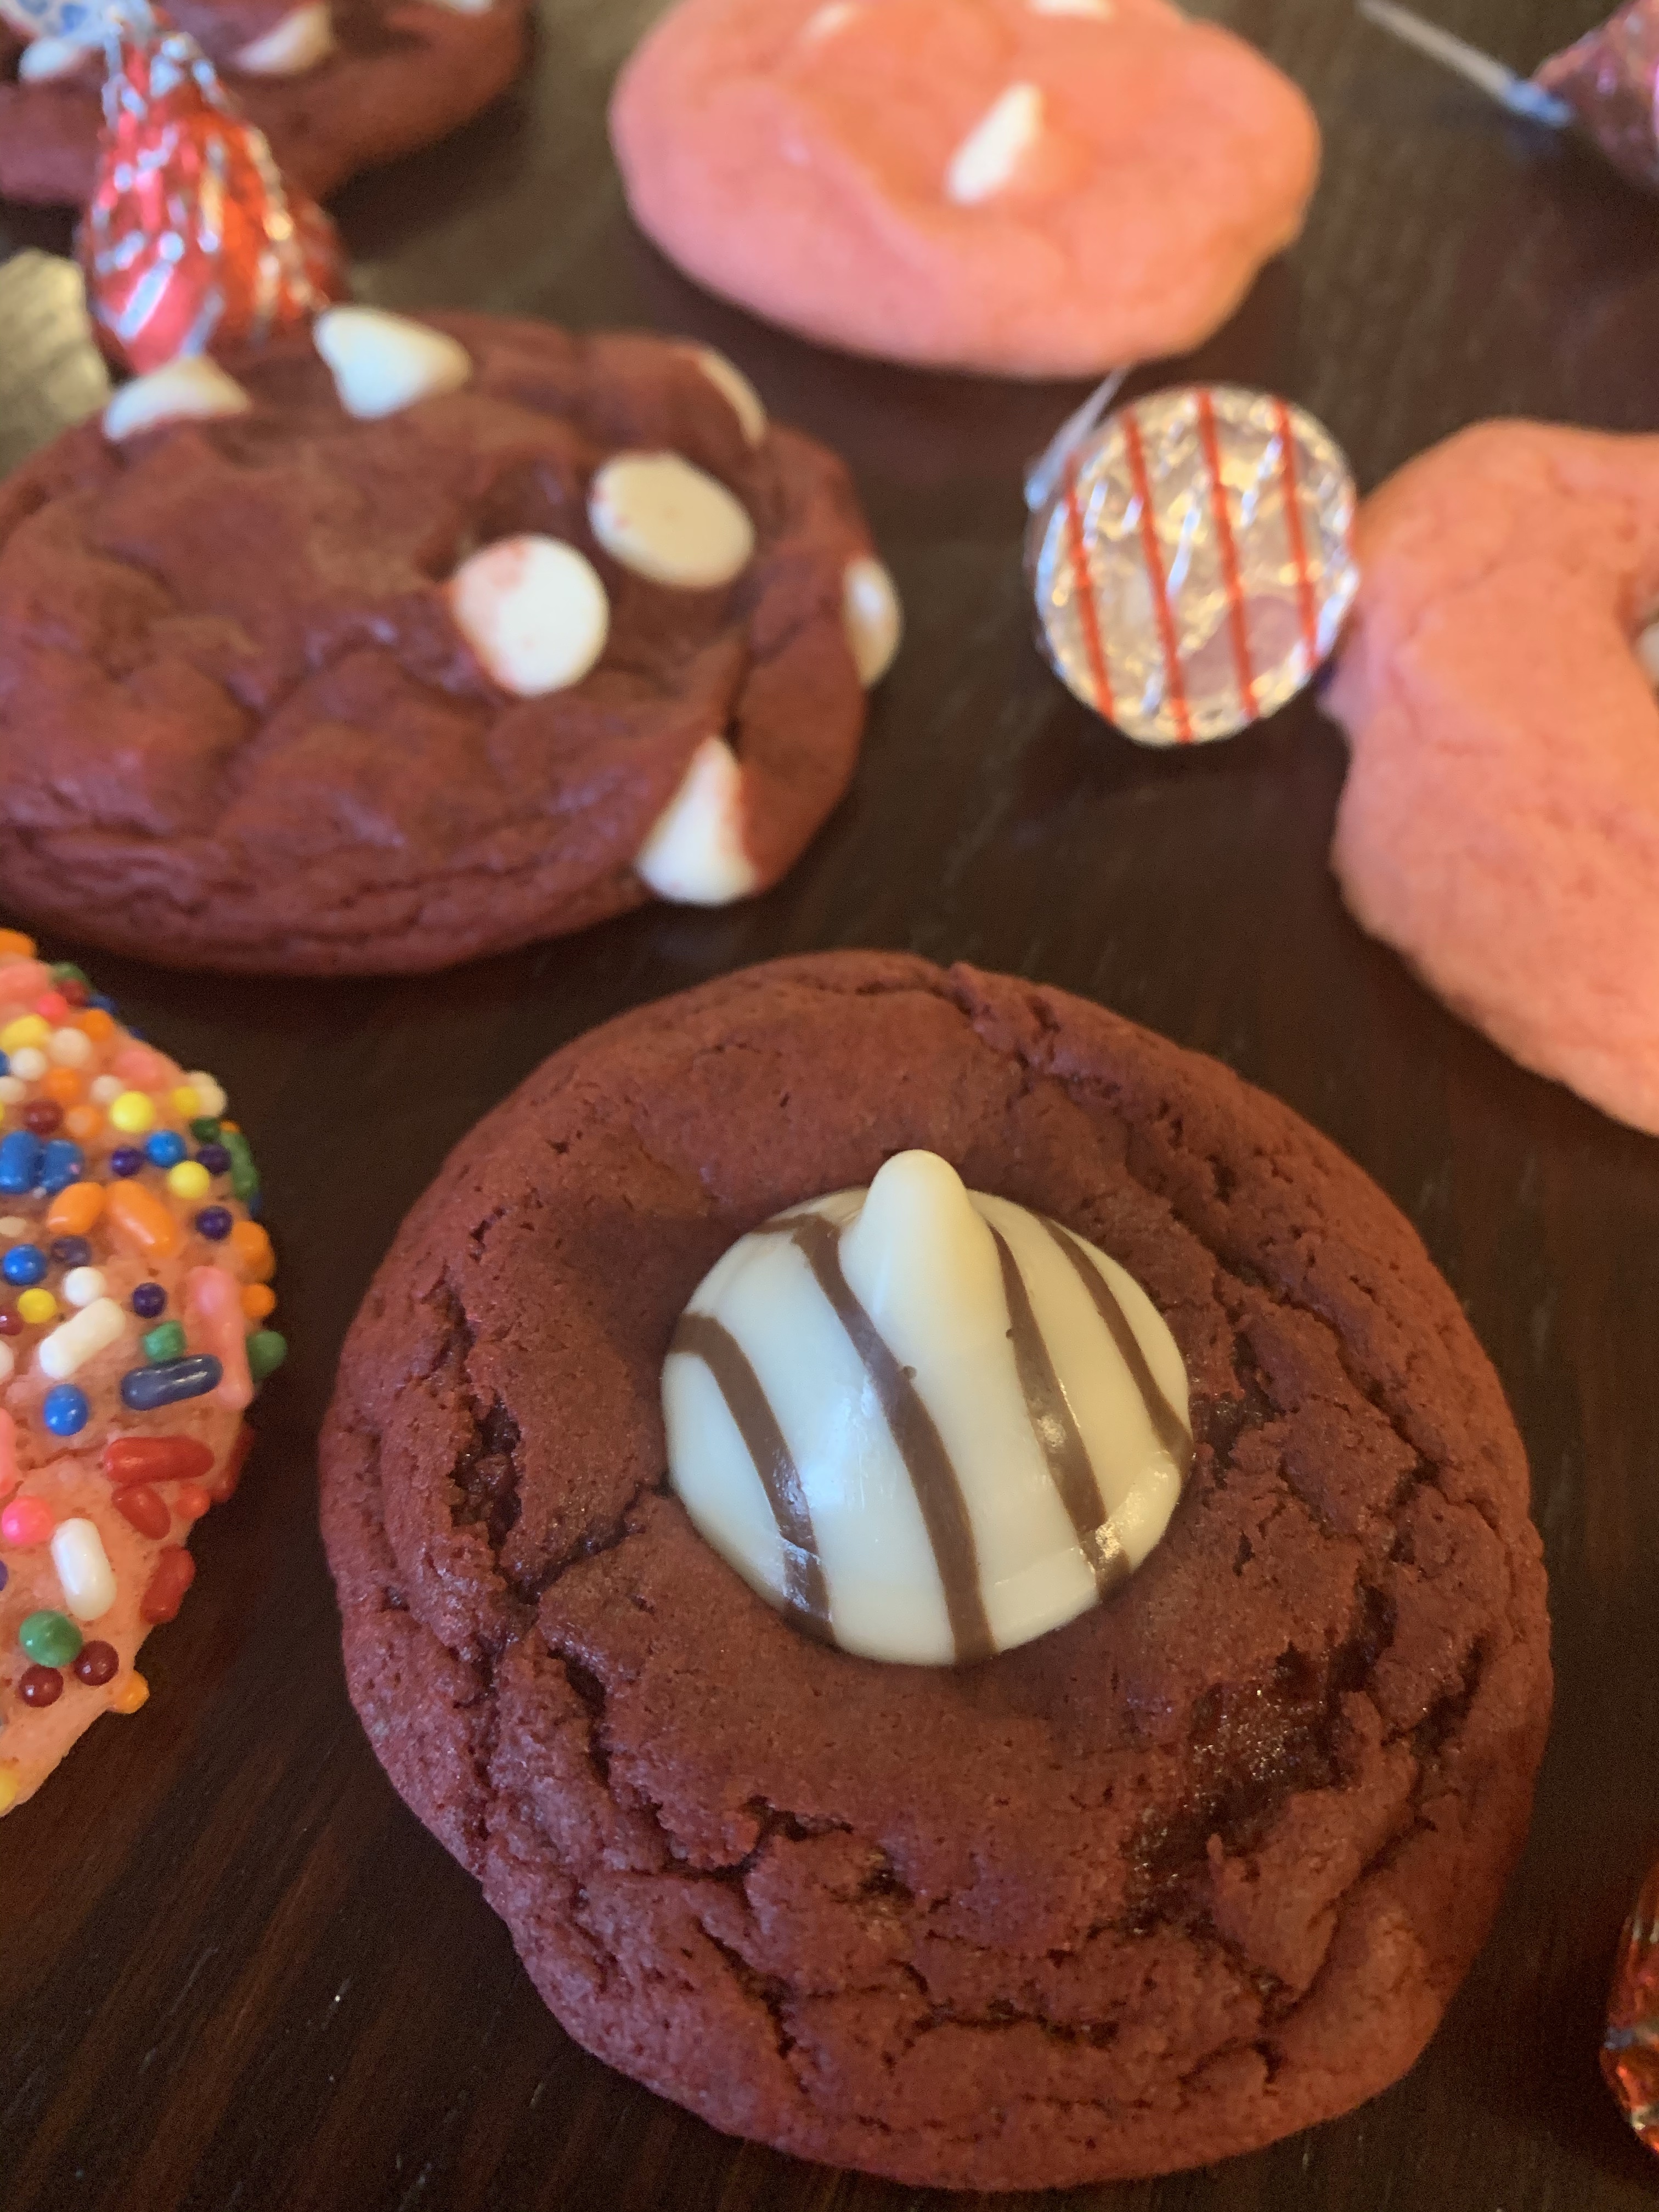 Cake mix cookies are an easy dessert recipe that is easily changed to fit any occasion! Only 4 ingredients and 6 minutes needed, this is an extremely easy cookie recipe!